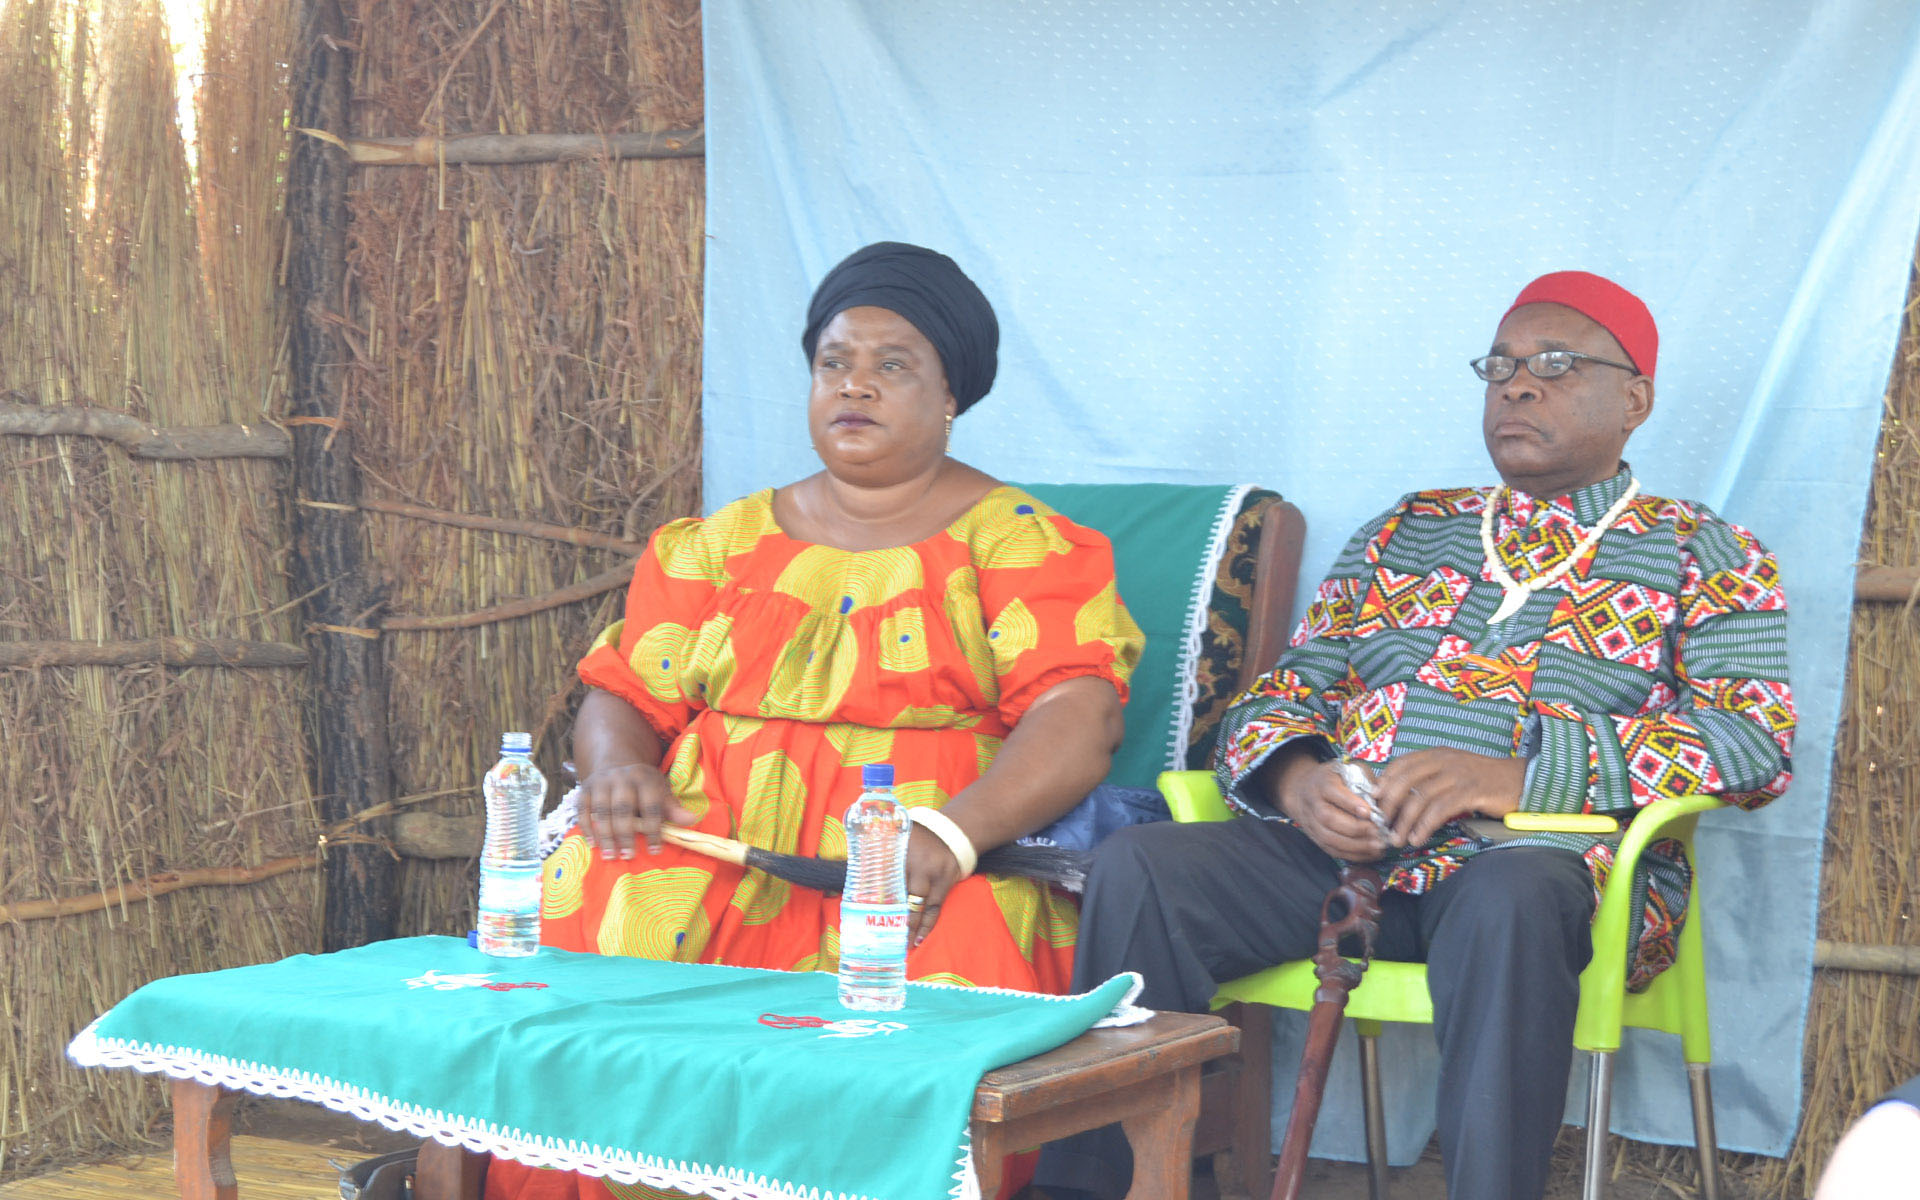 Chieftainess Malembeka, the traditional ruler and landowner, presides over a village meeting, accompanied by her husband.